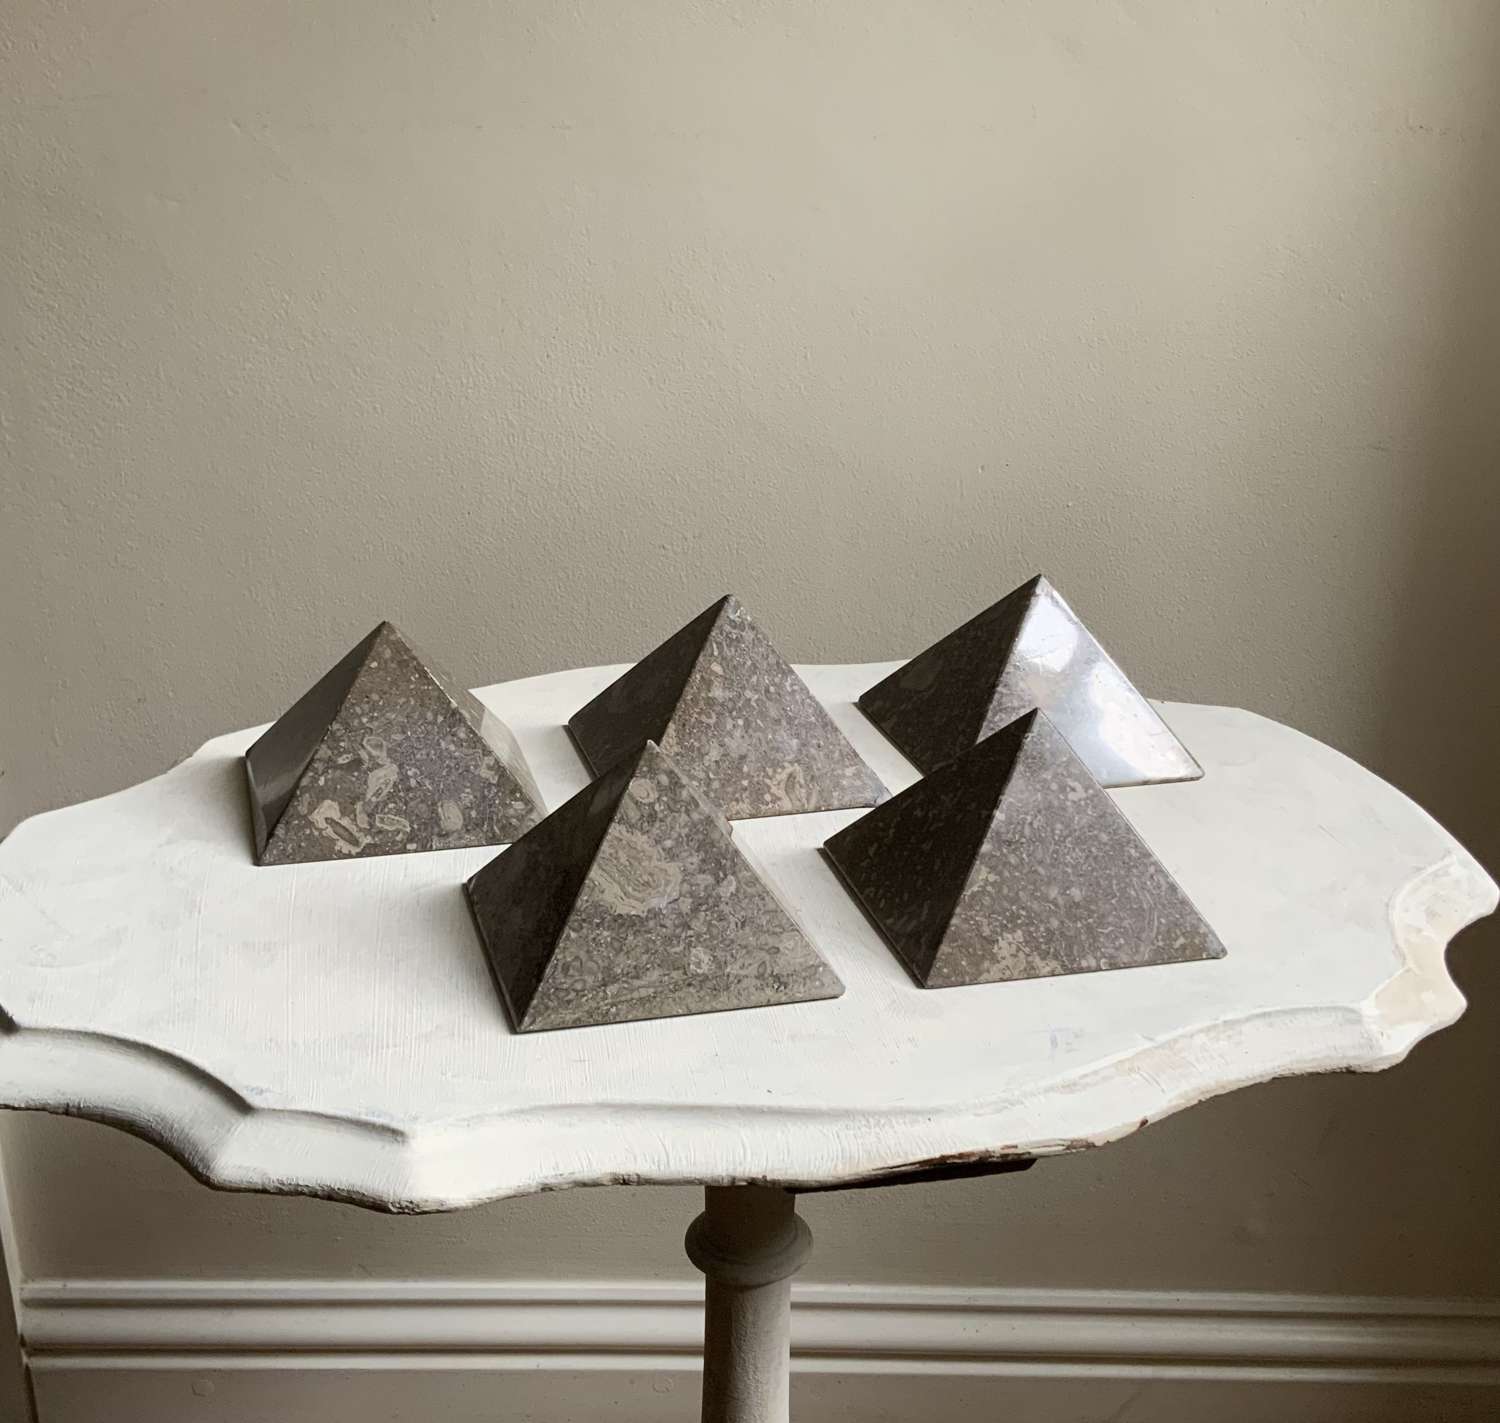 A Good Collection of Five Polished Fossil Marble Pyramids